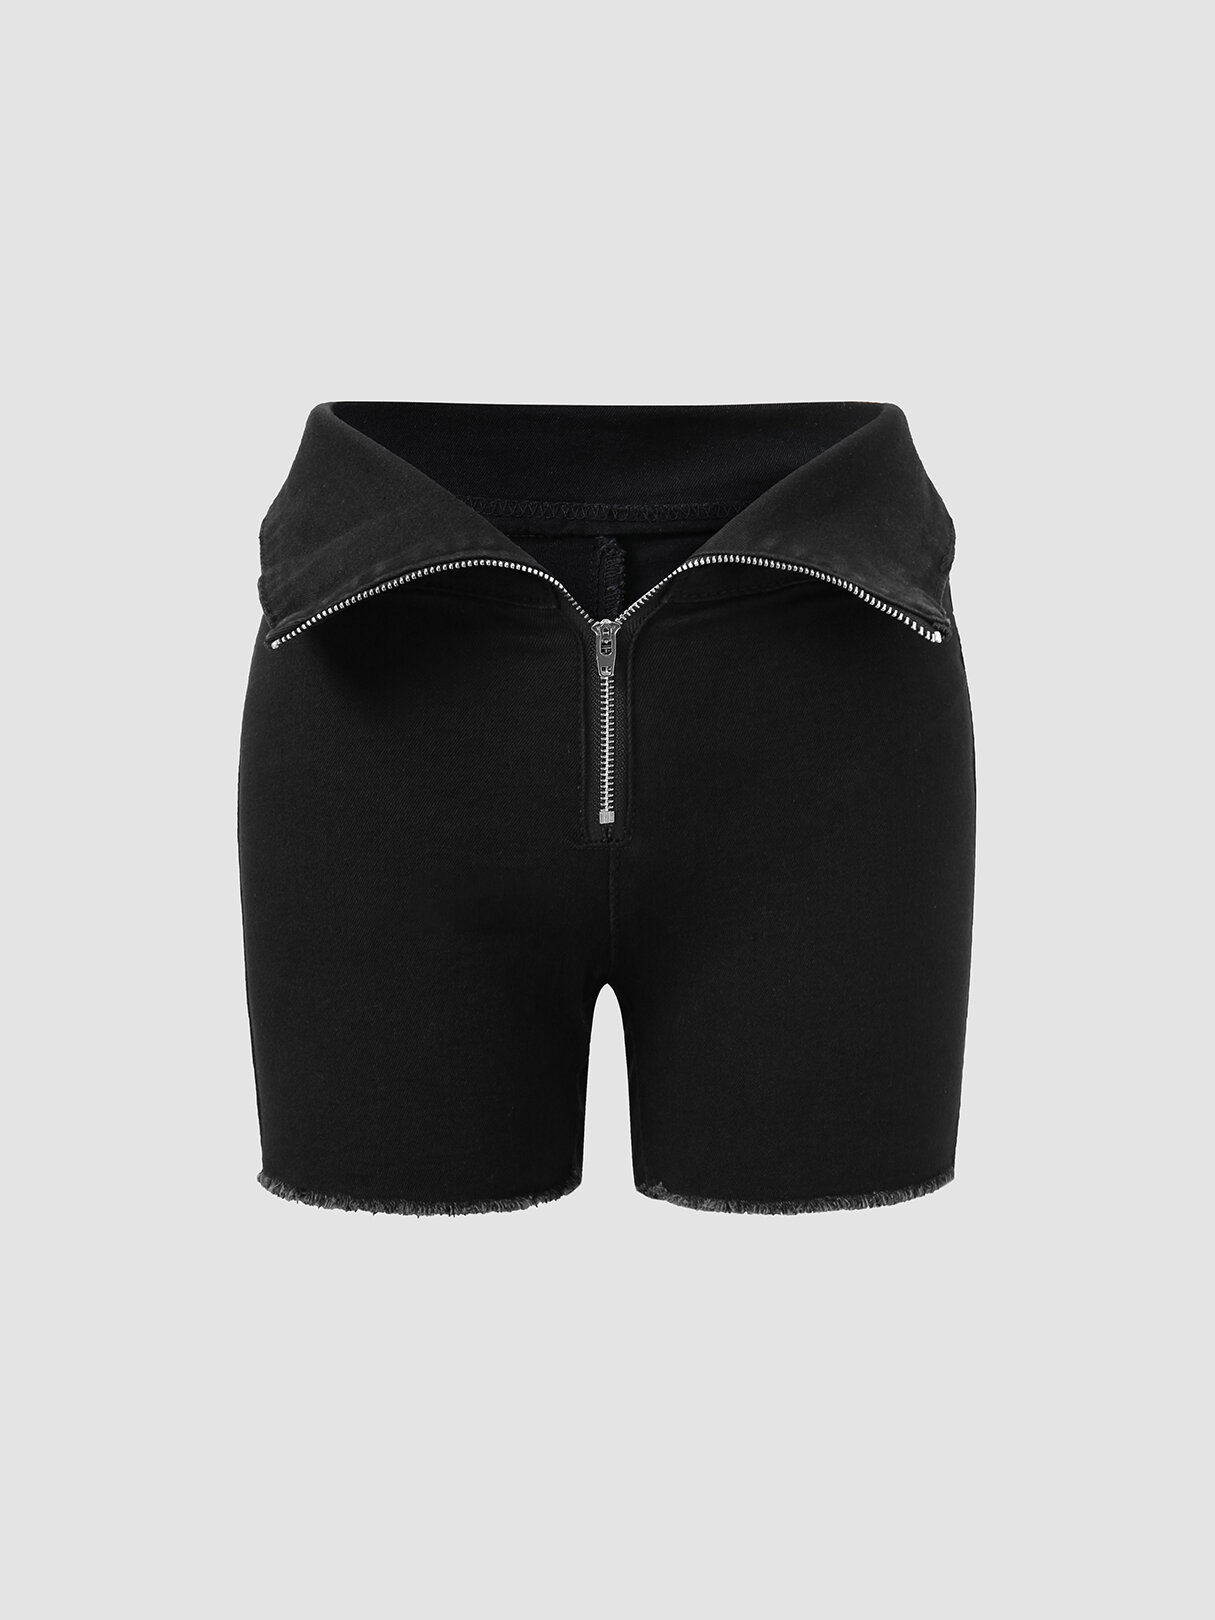 Solid Zip Front Stretch Denim Shorts For Women